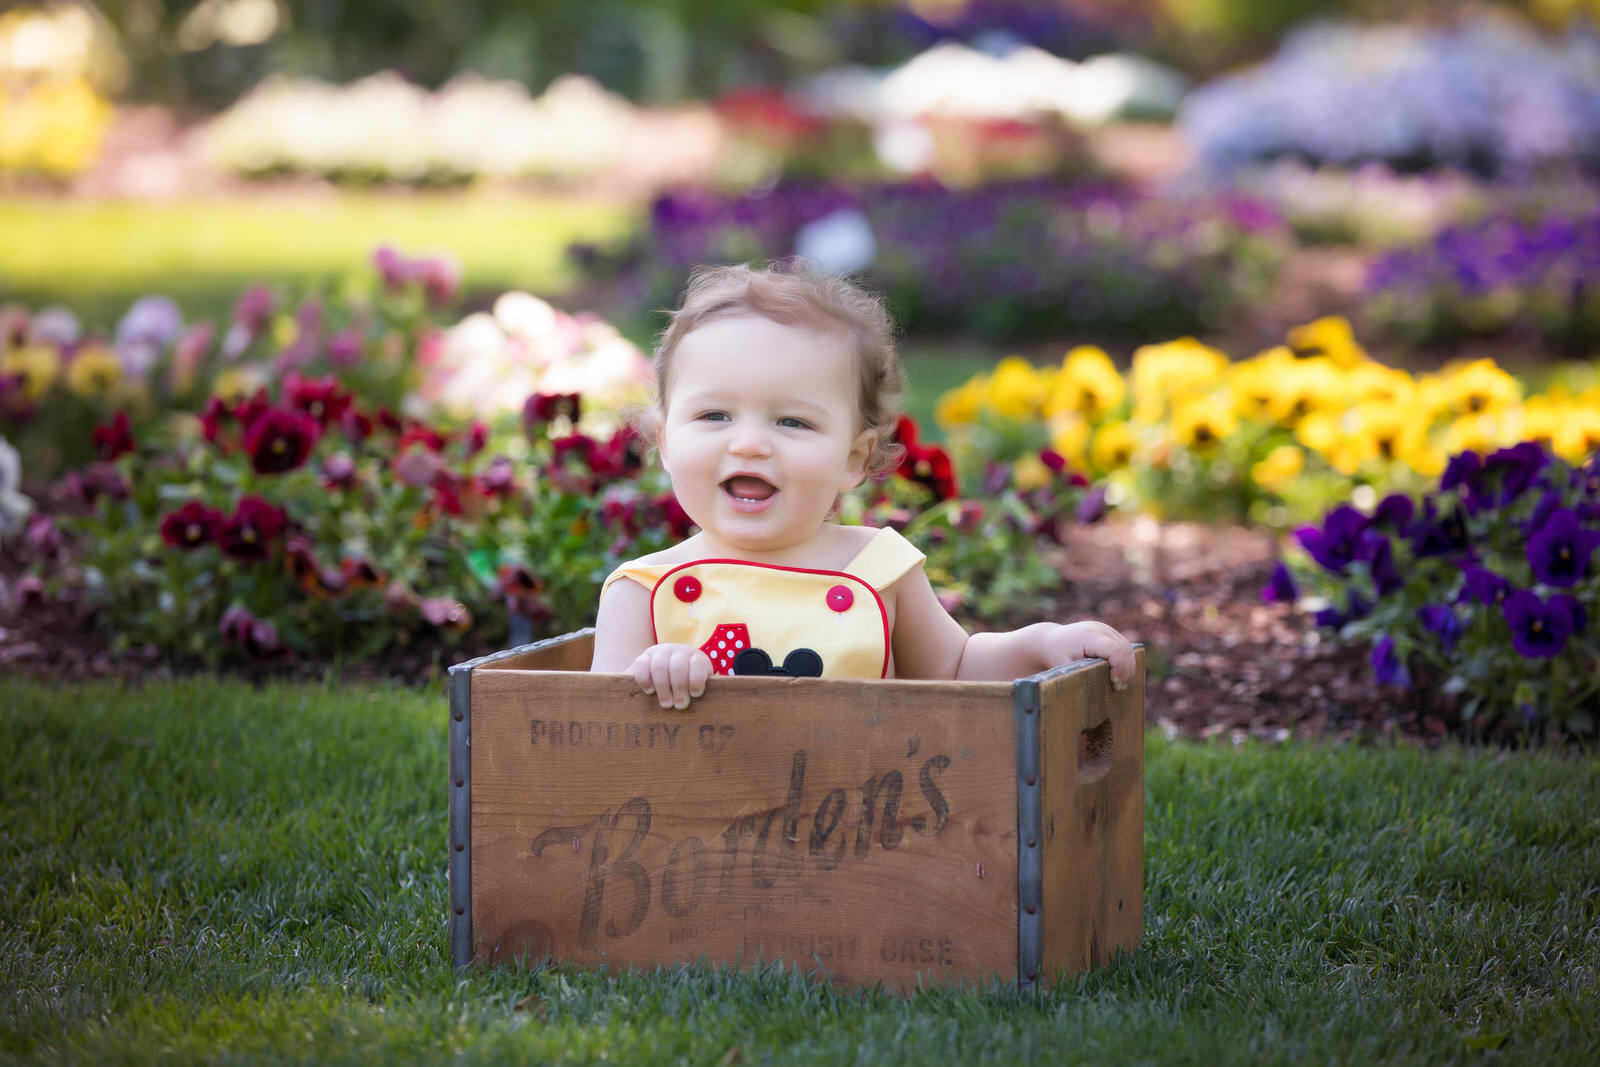 A young toddler sits in yellow overalls inside a wooden apple box midlothian pediatricians